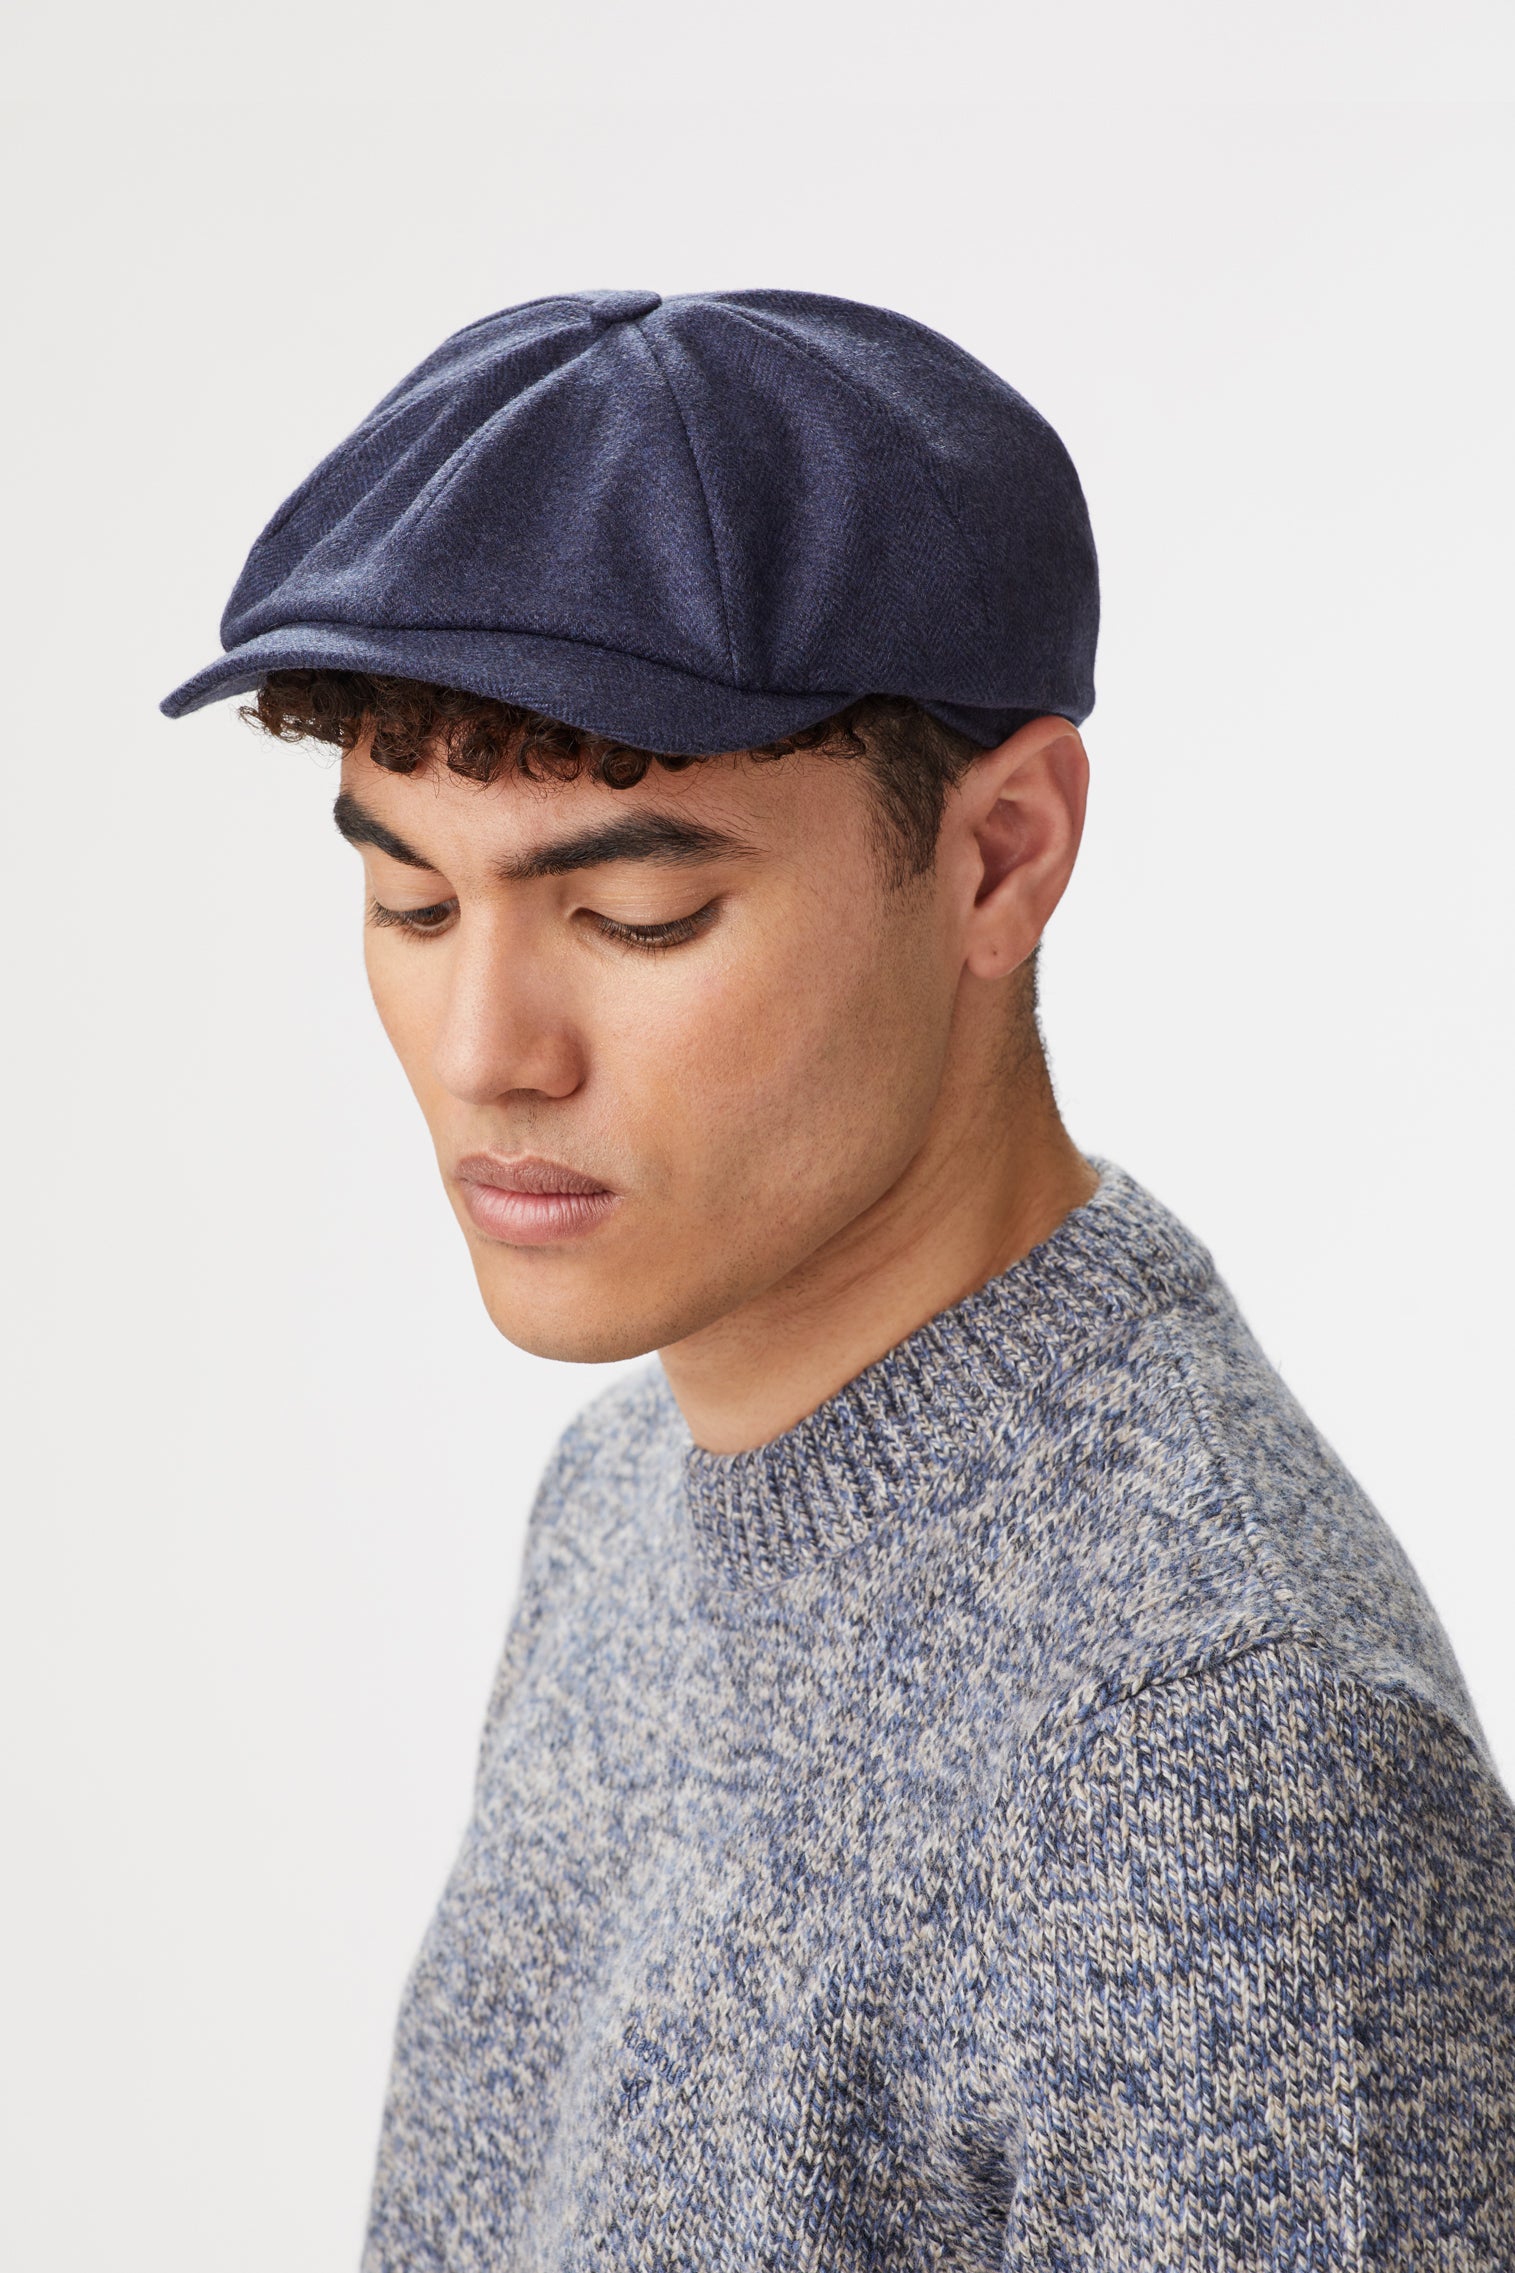 Cashmere Newsboy Cap - Products - Lock & Co. Hatters London UK